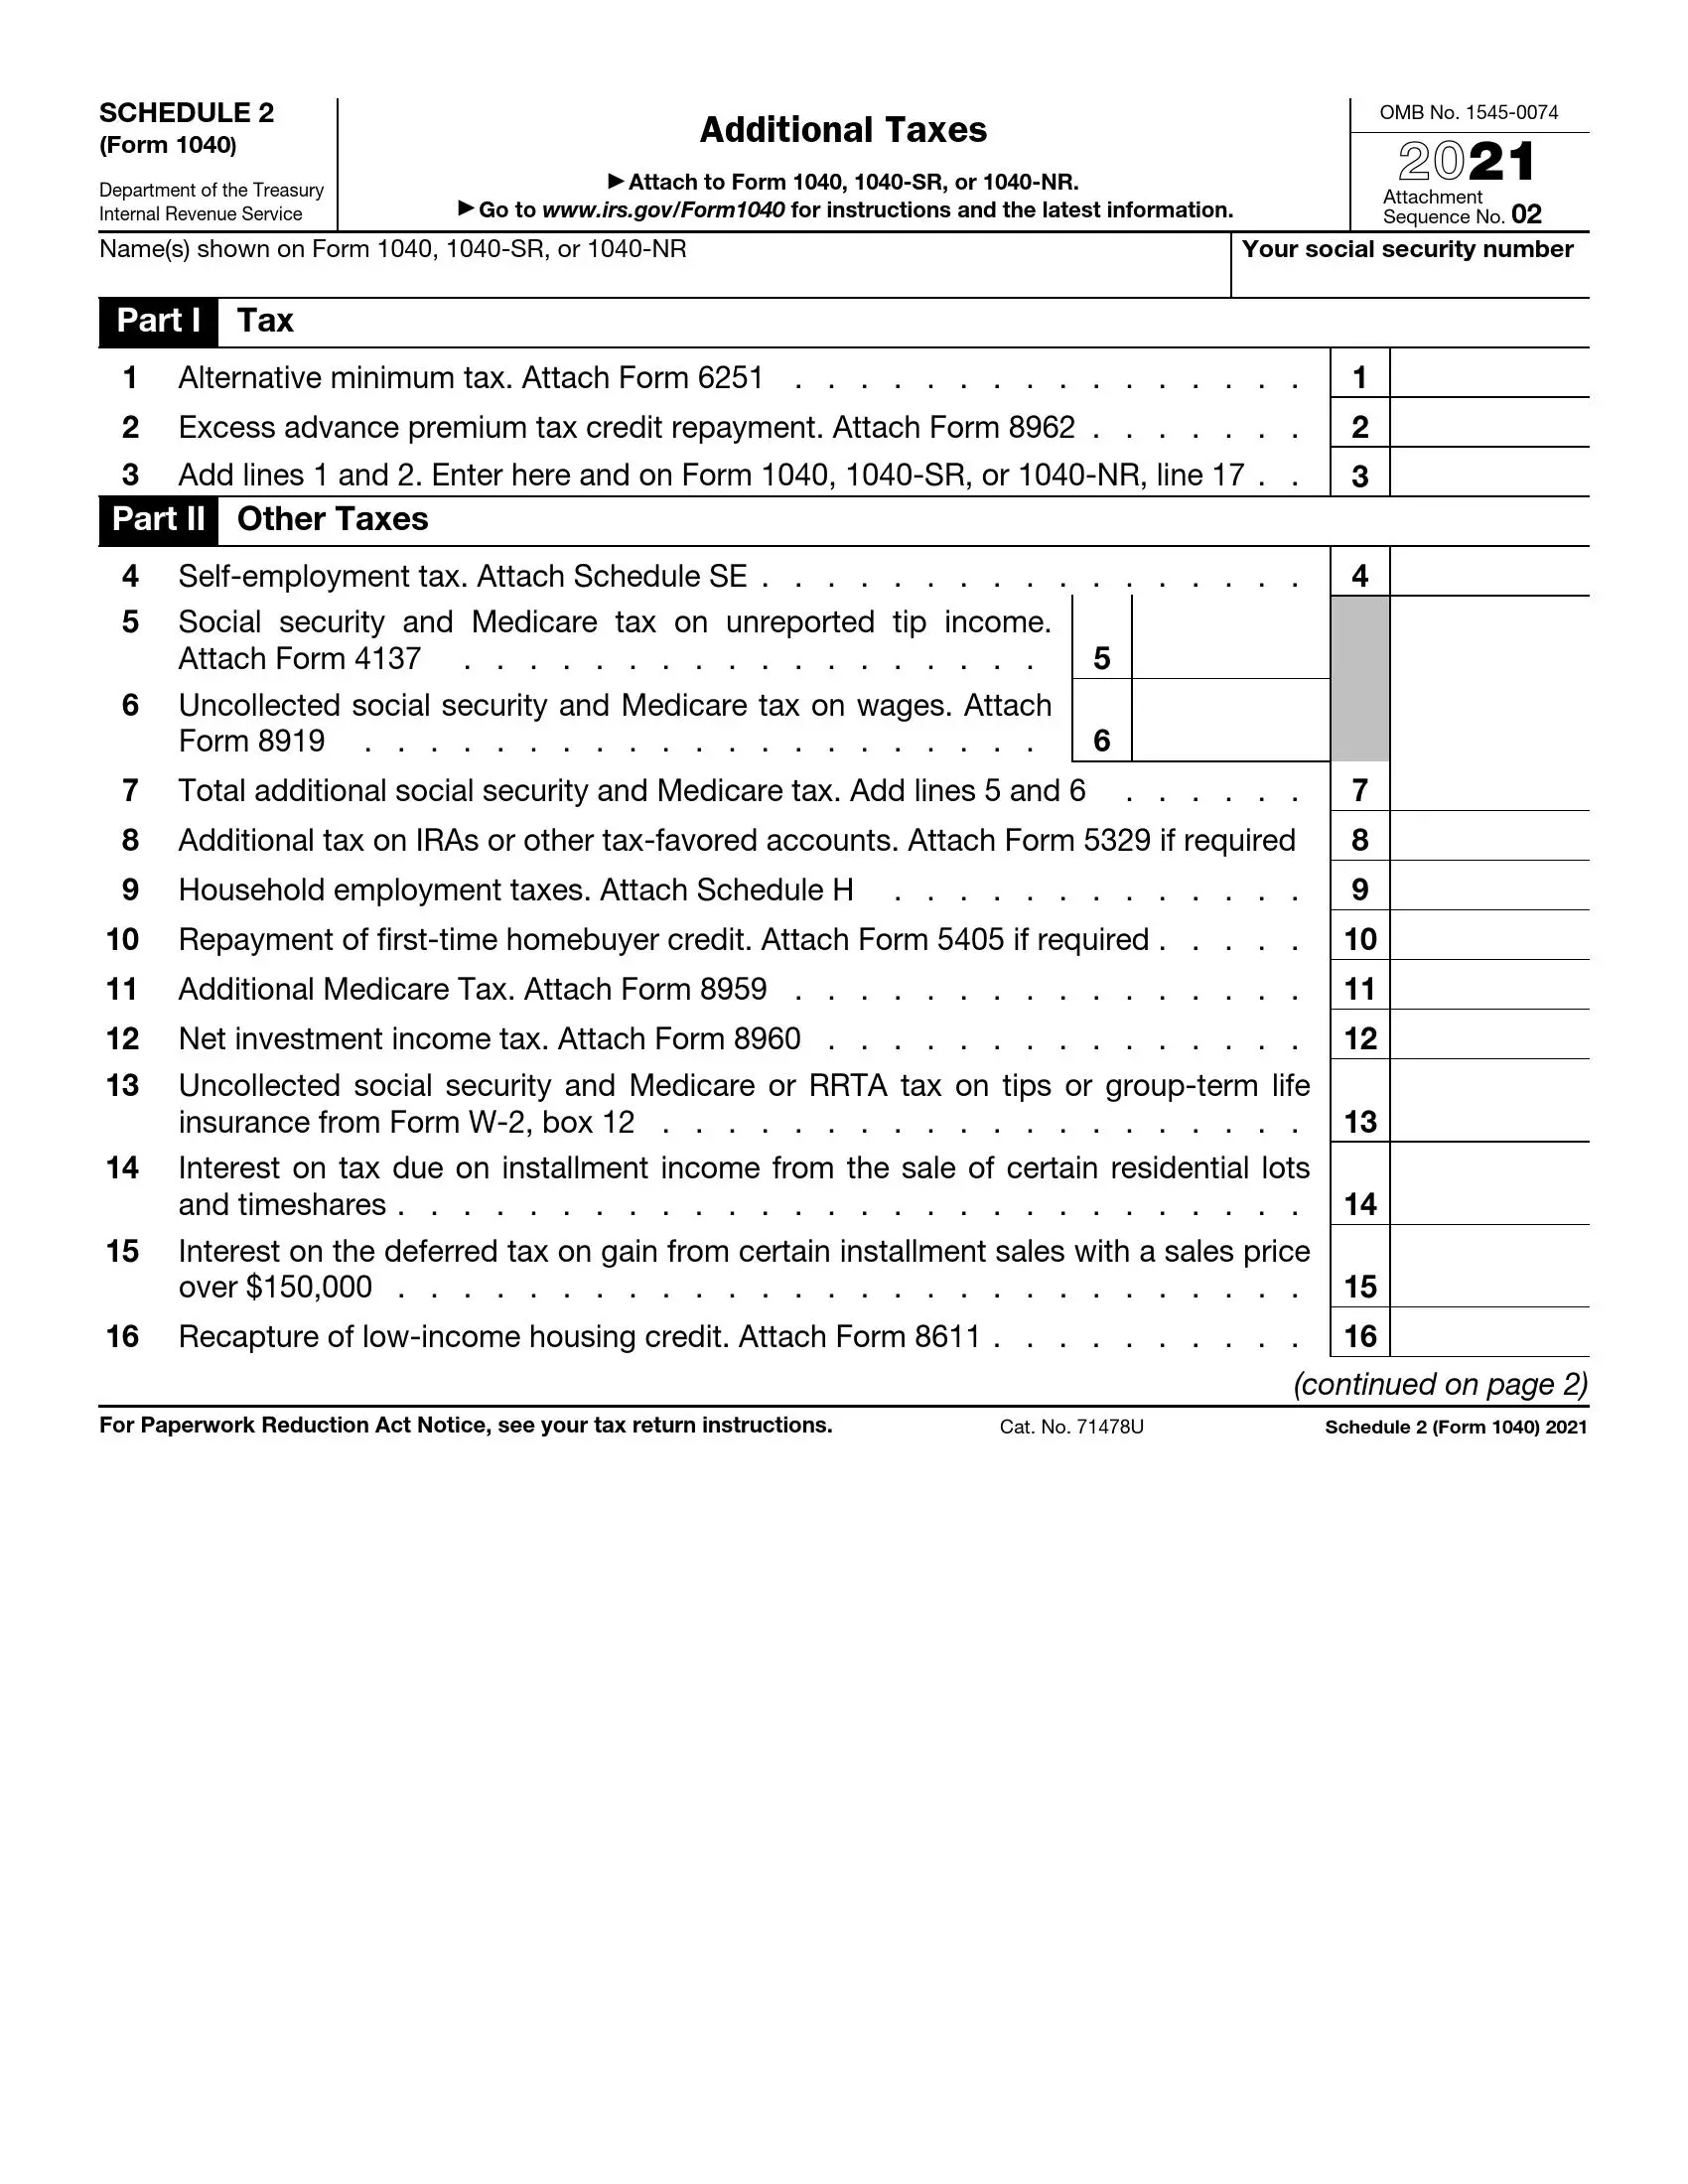 what is schedule 2 tax form